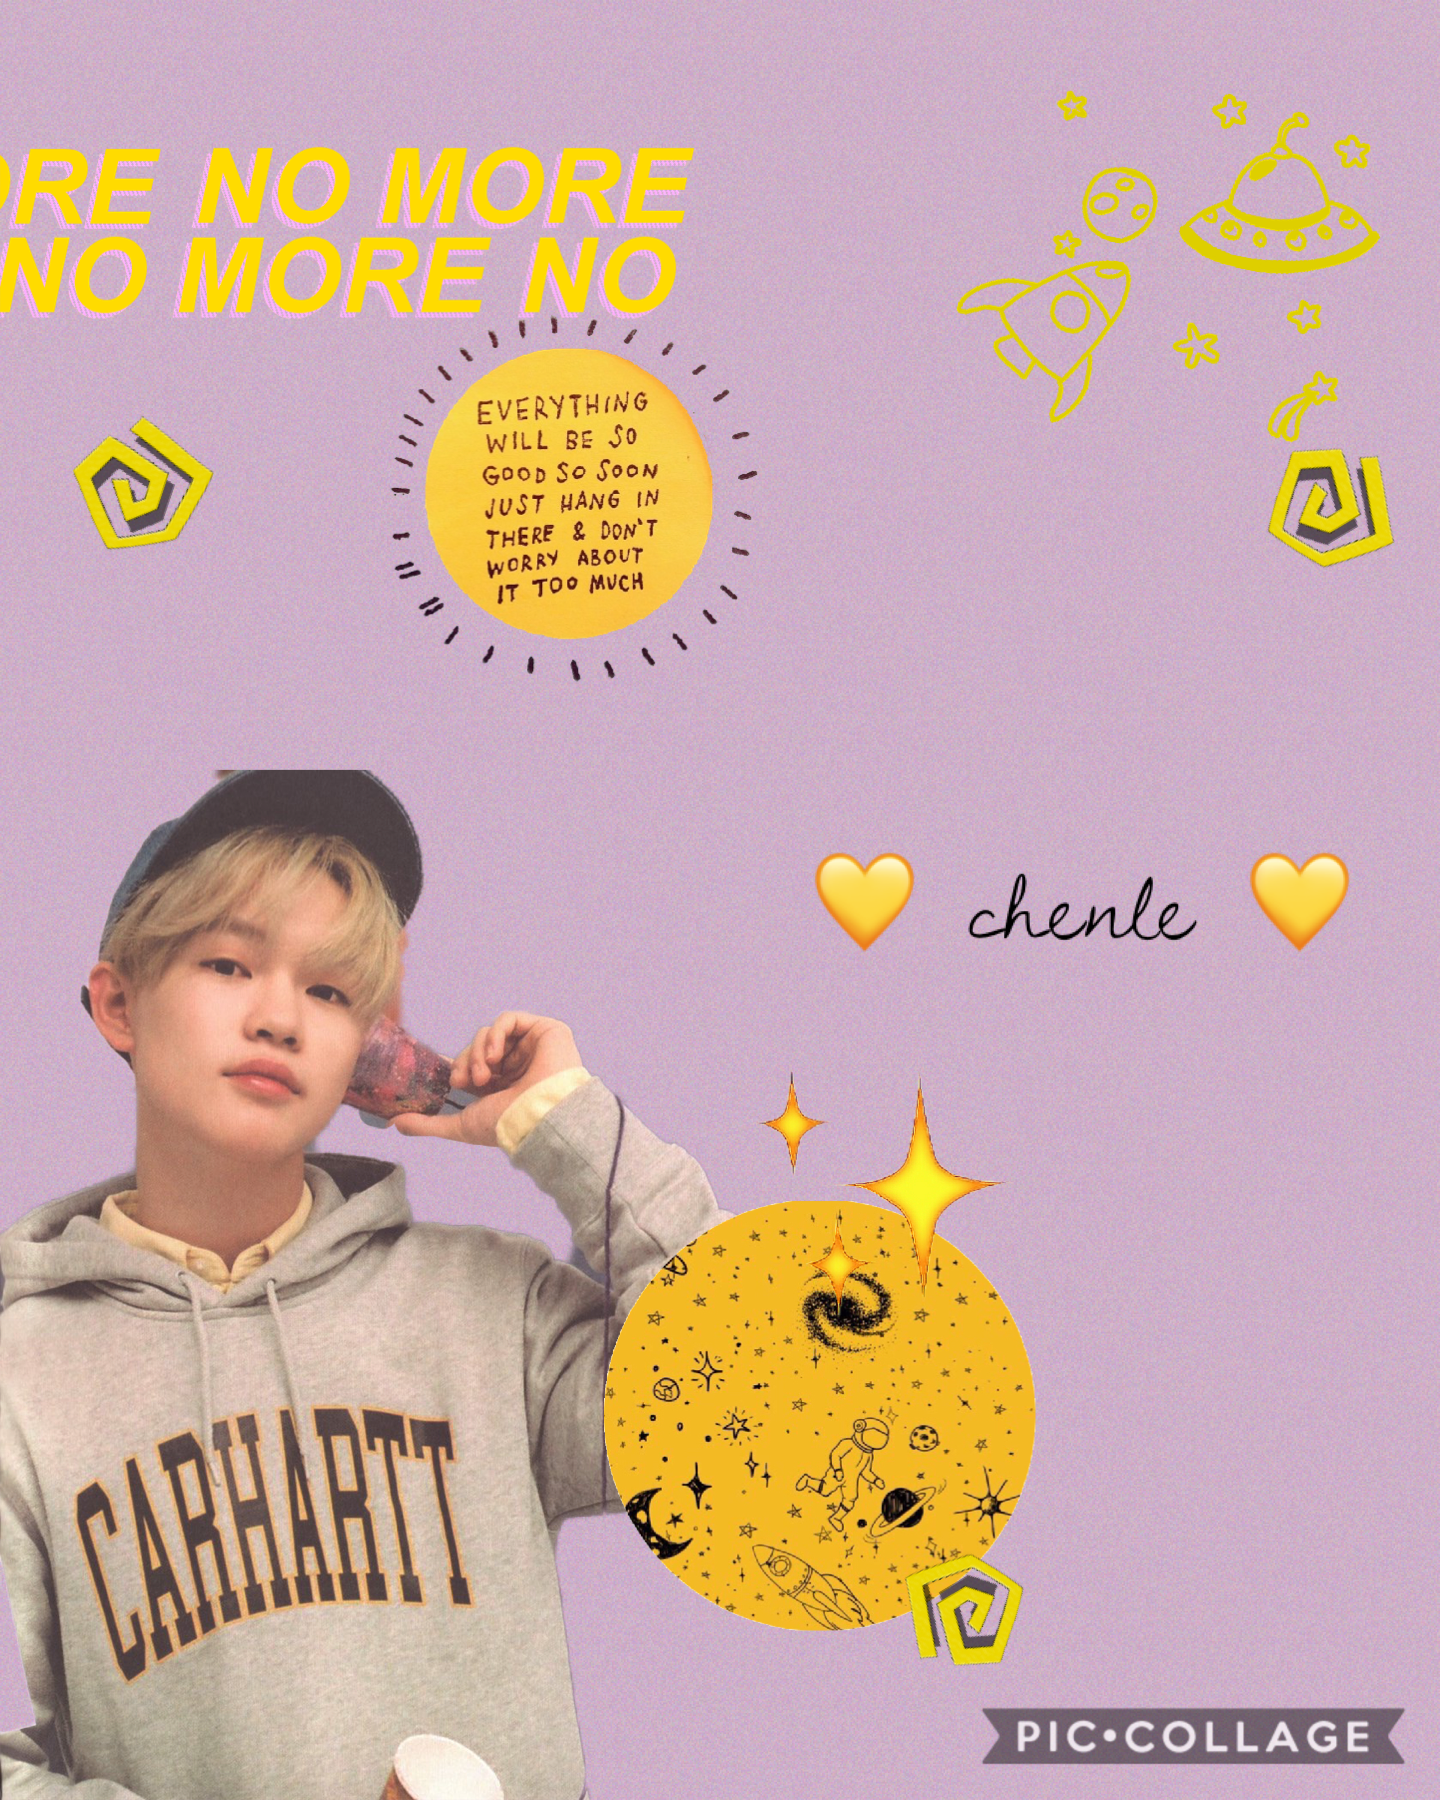 happy birthday to chenle of nct! He’s worked so hard since debut and he is honestly so precious. Once again, happy birthday chenle! 

qotd: favourite aspect about chenle?
aotd: his laugh by far 💛
